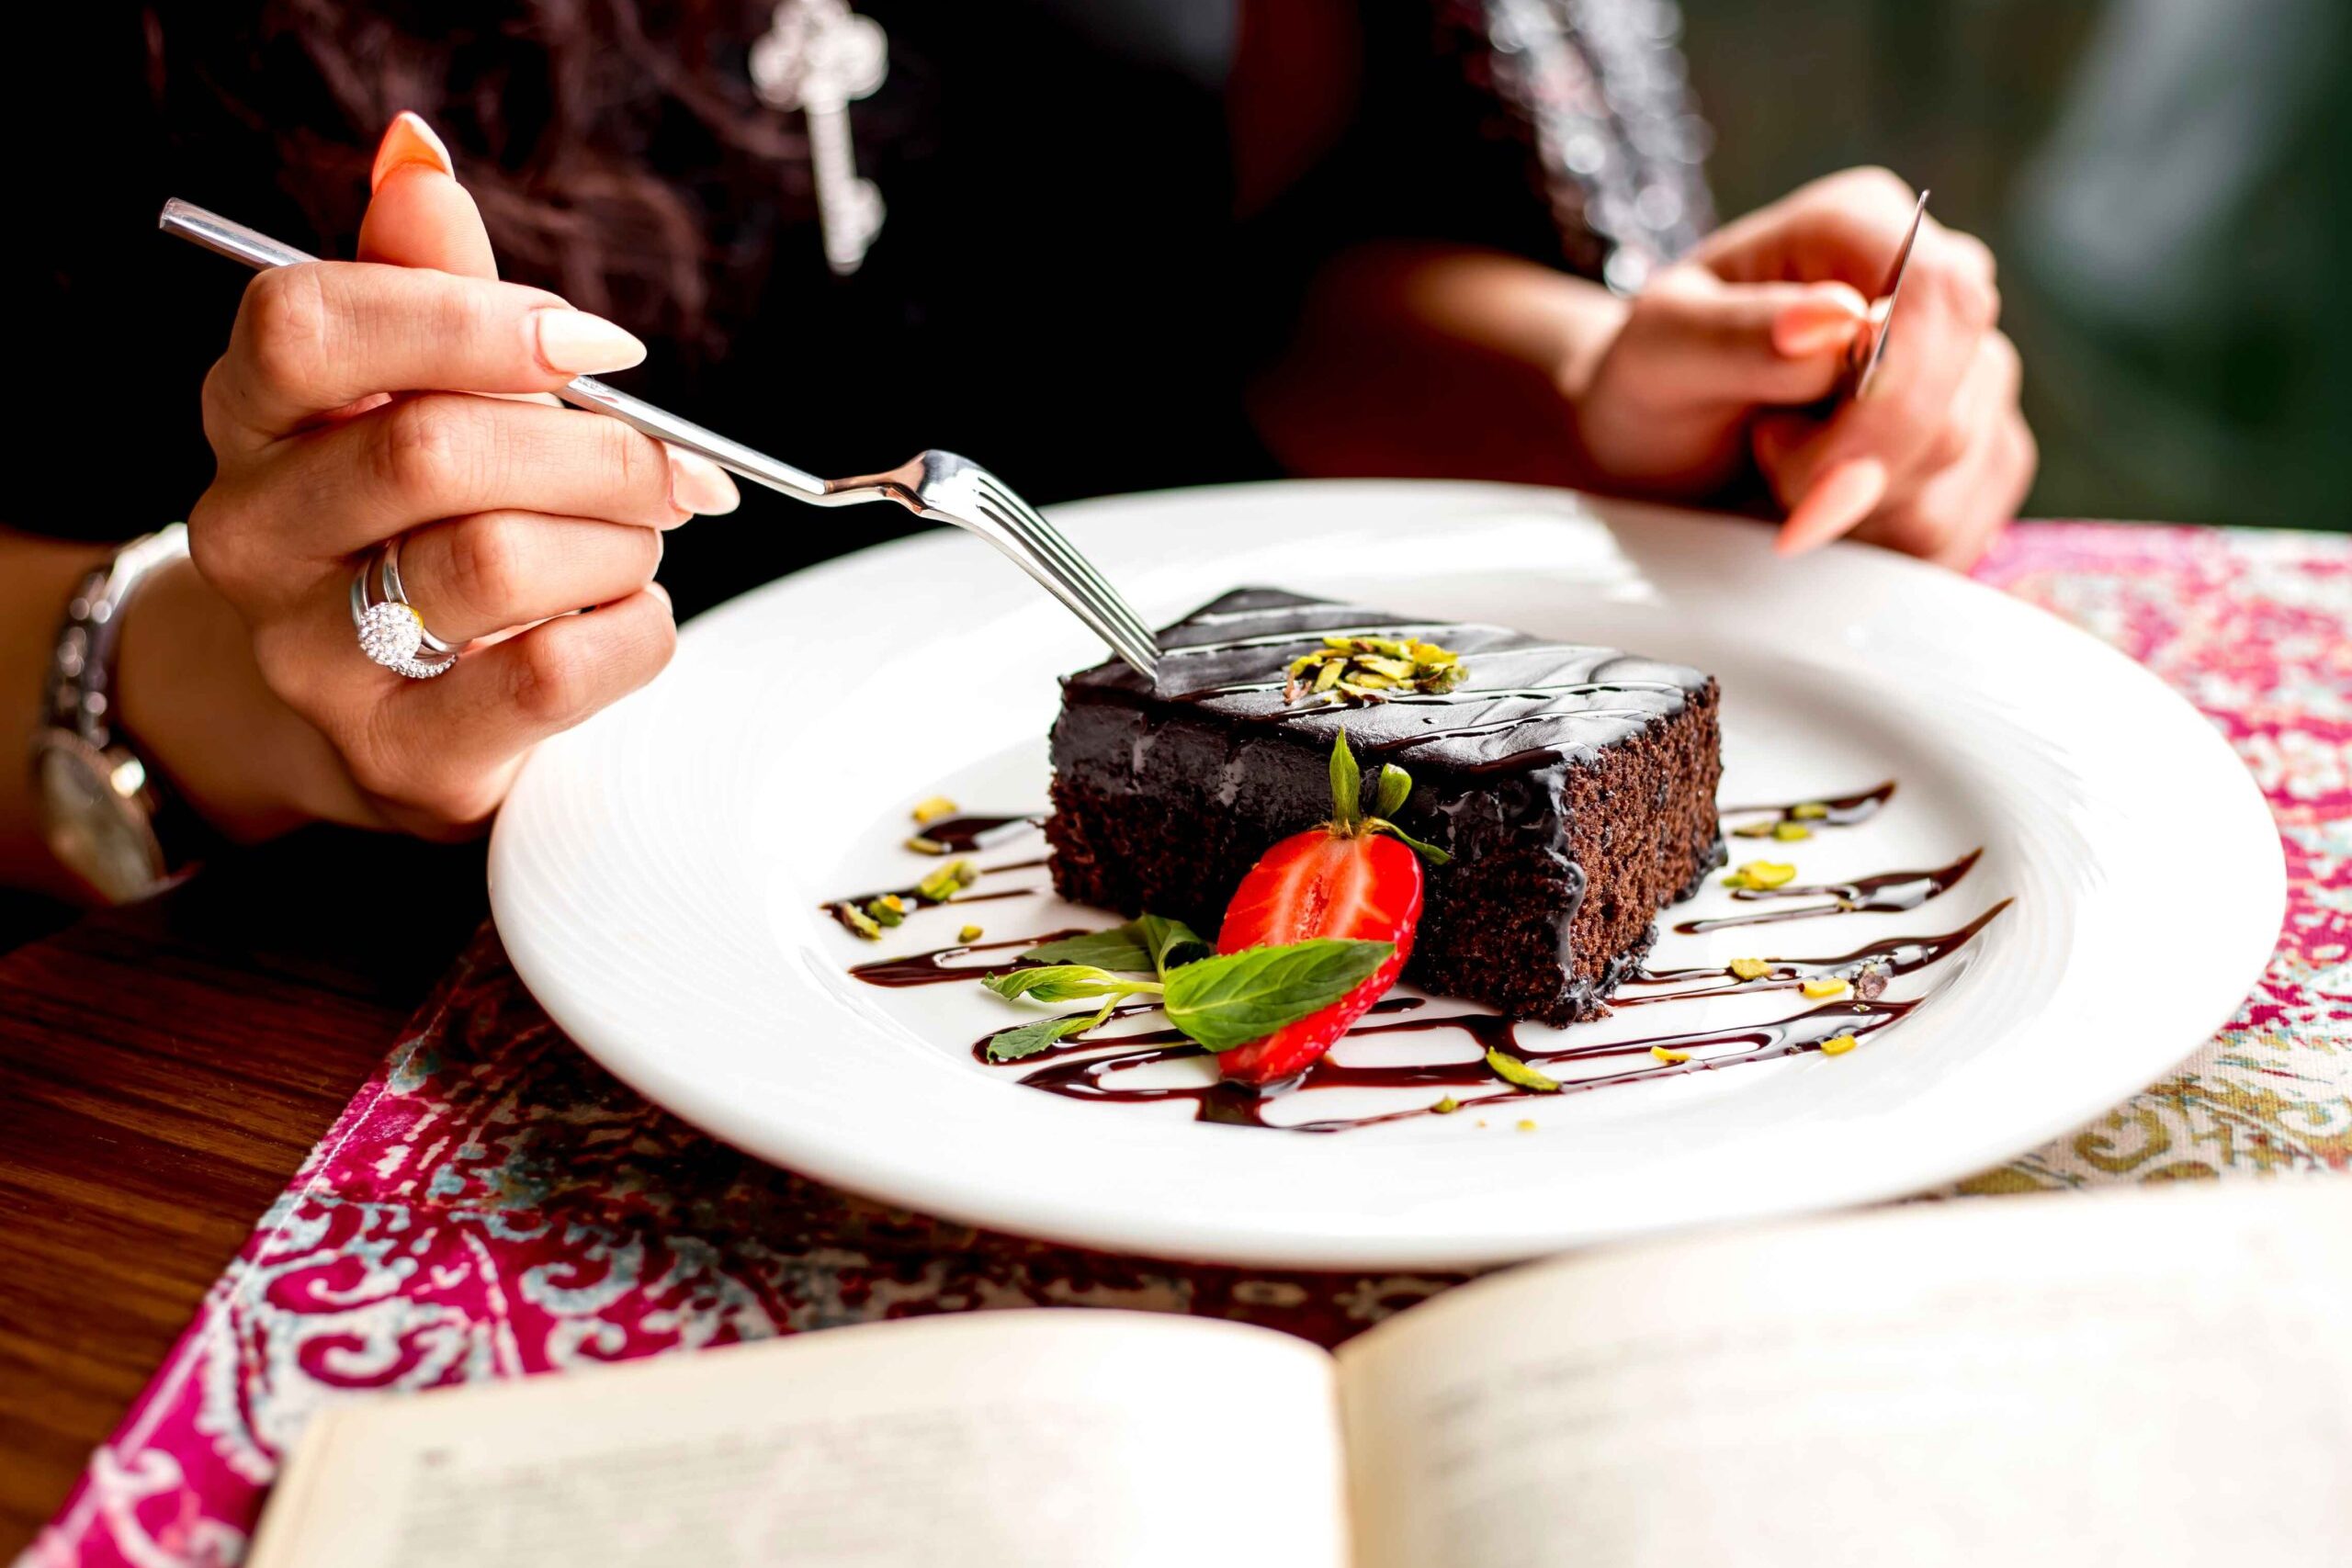 side-view-woman-eating-chocolate-cake-decorated-with-strawberry-table (1)